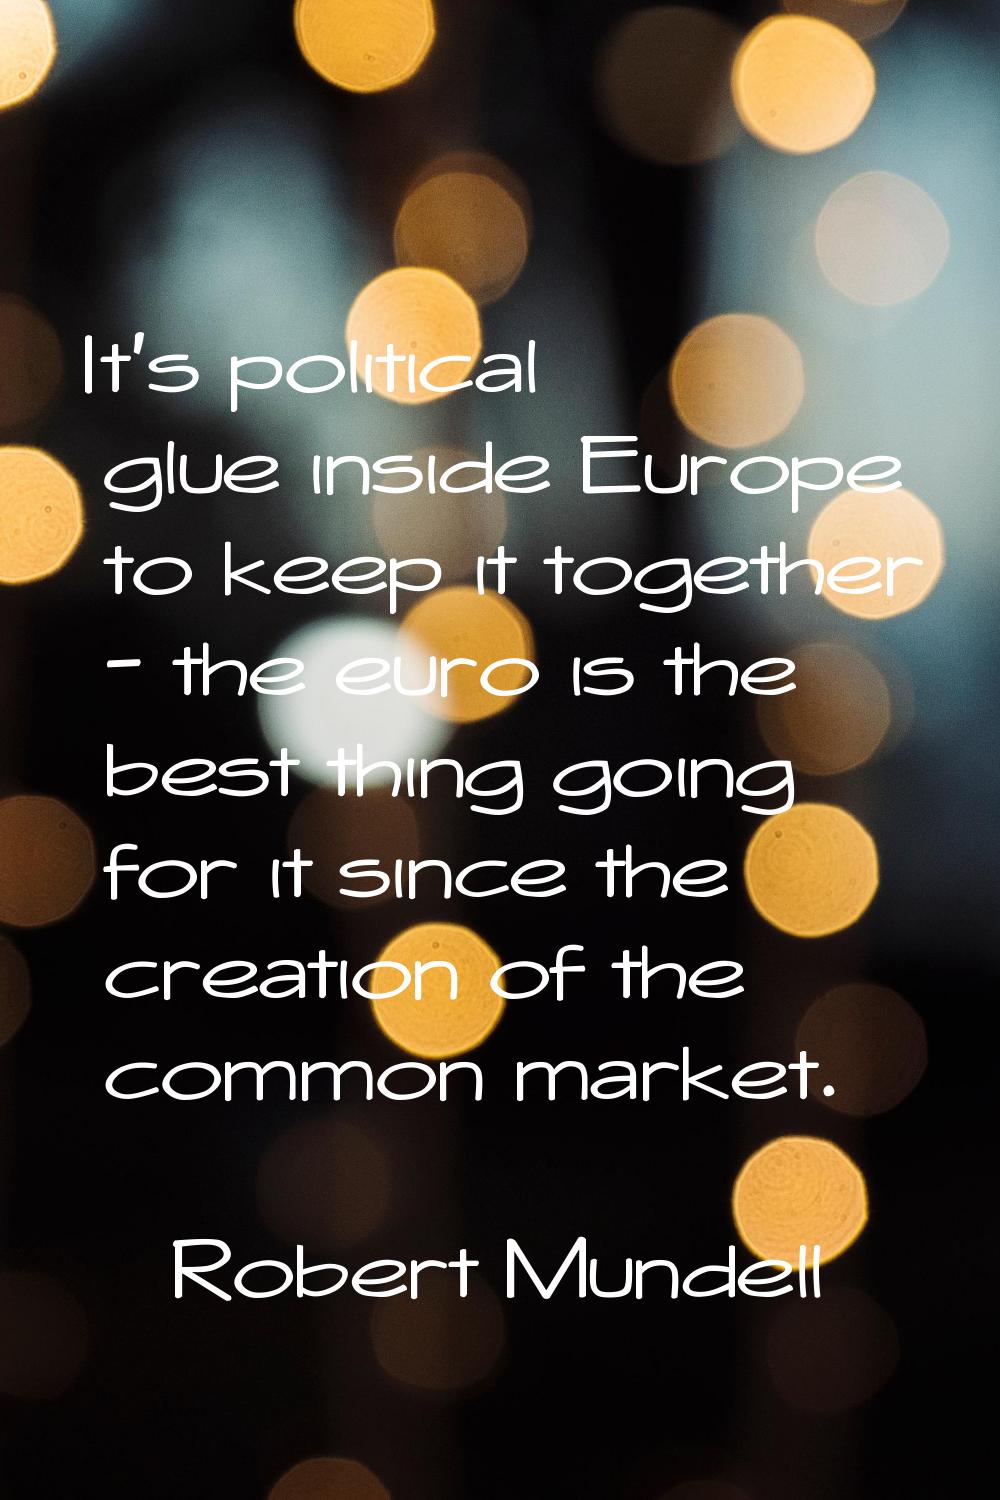 It's political glue inside Europe to keep it together - the euro is the best thing going for it sin